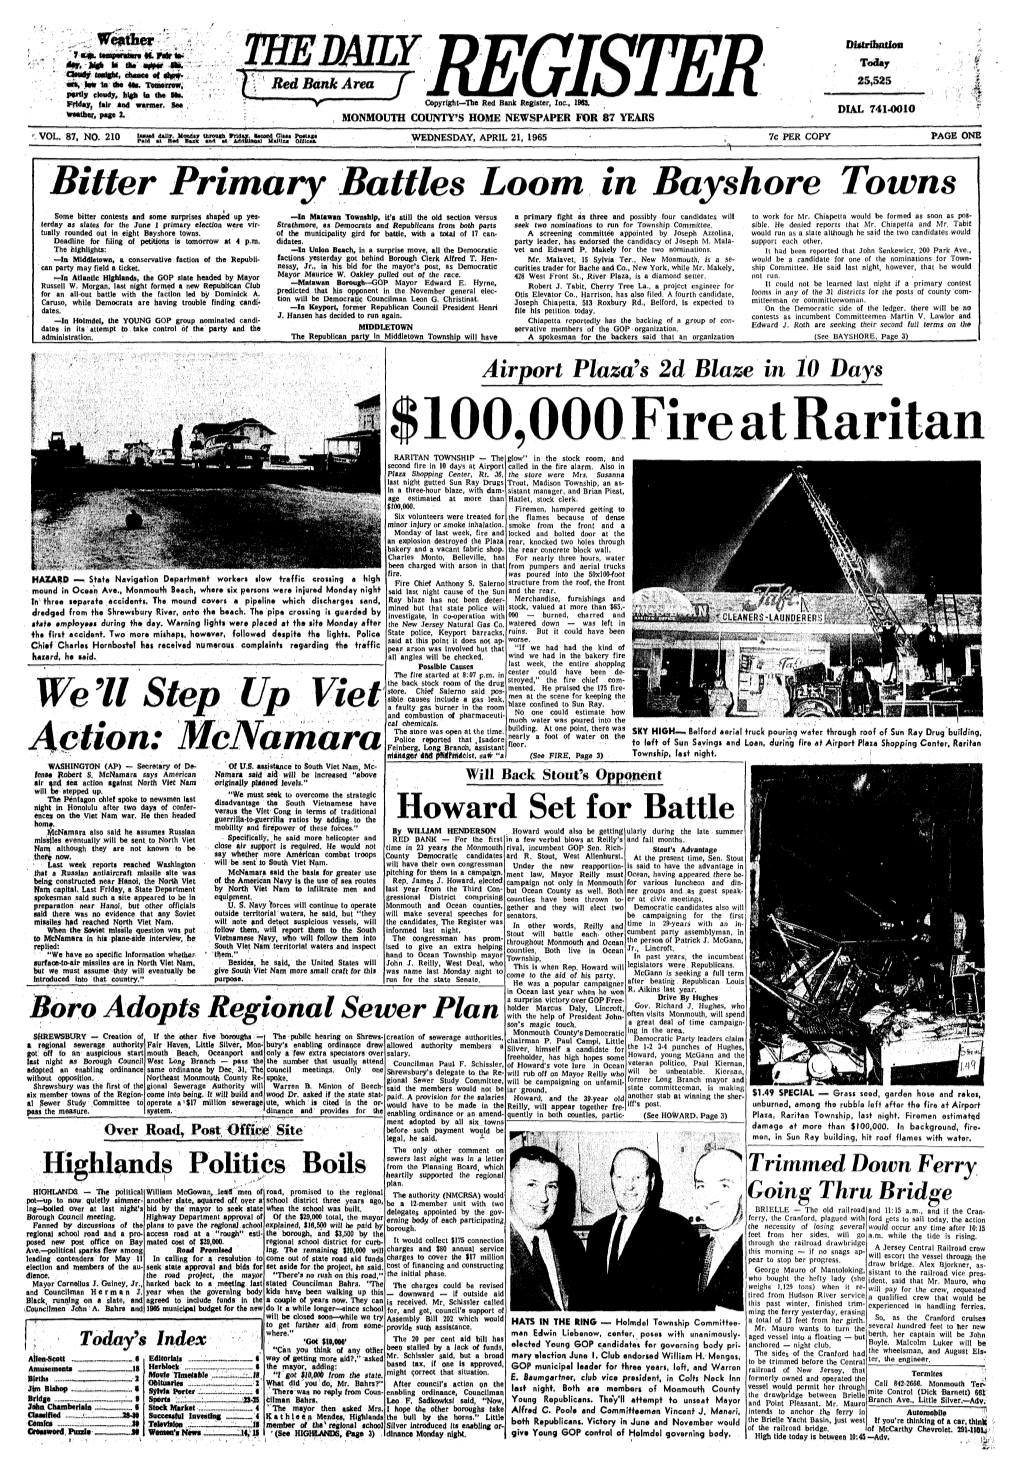 100,000 Fire at Raritan RARITAN TOWNSHIP - the Glow" in the Stock Room, and Second Fire in 10 Days at Airport Called in the Fire Alarm